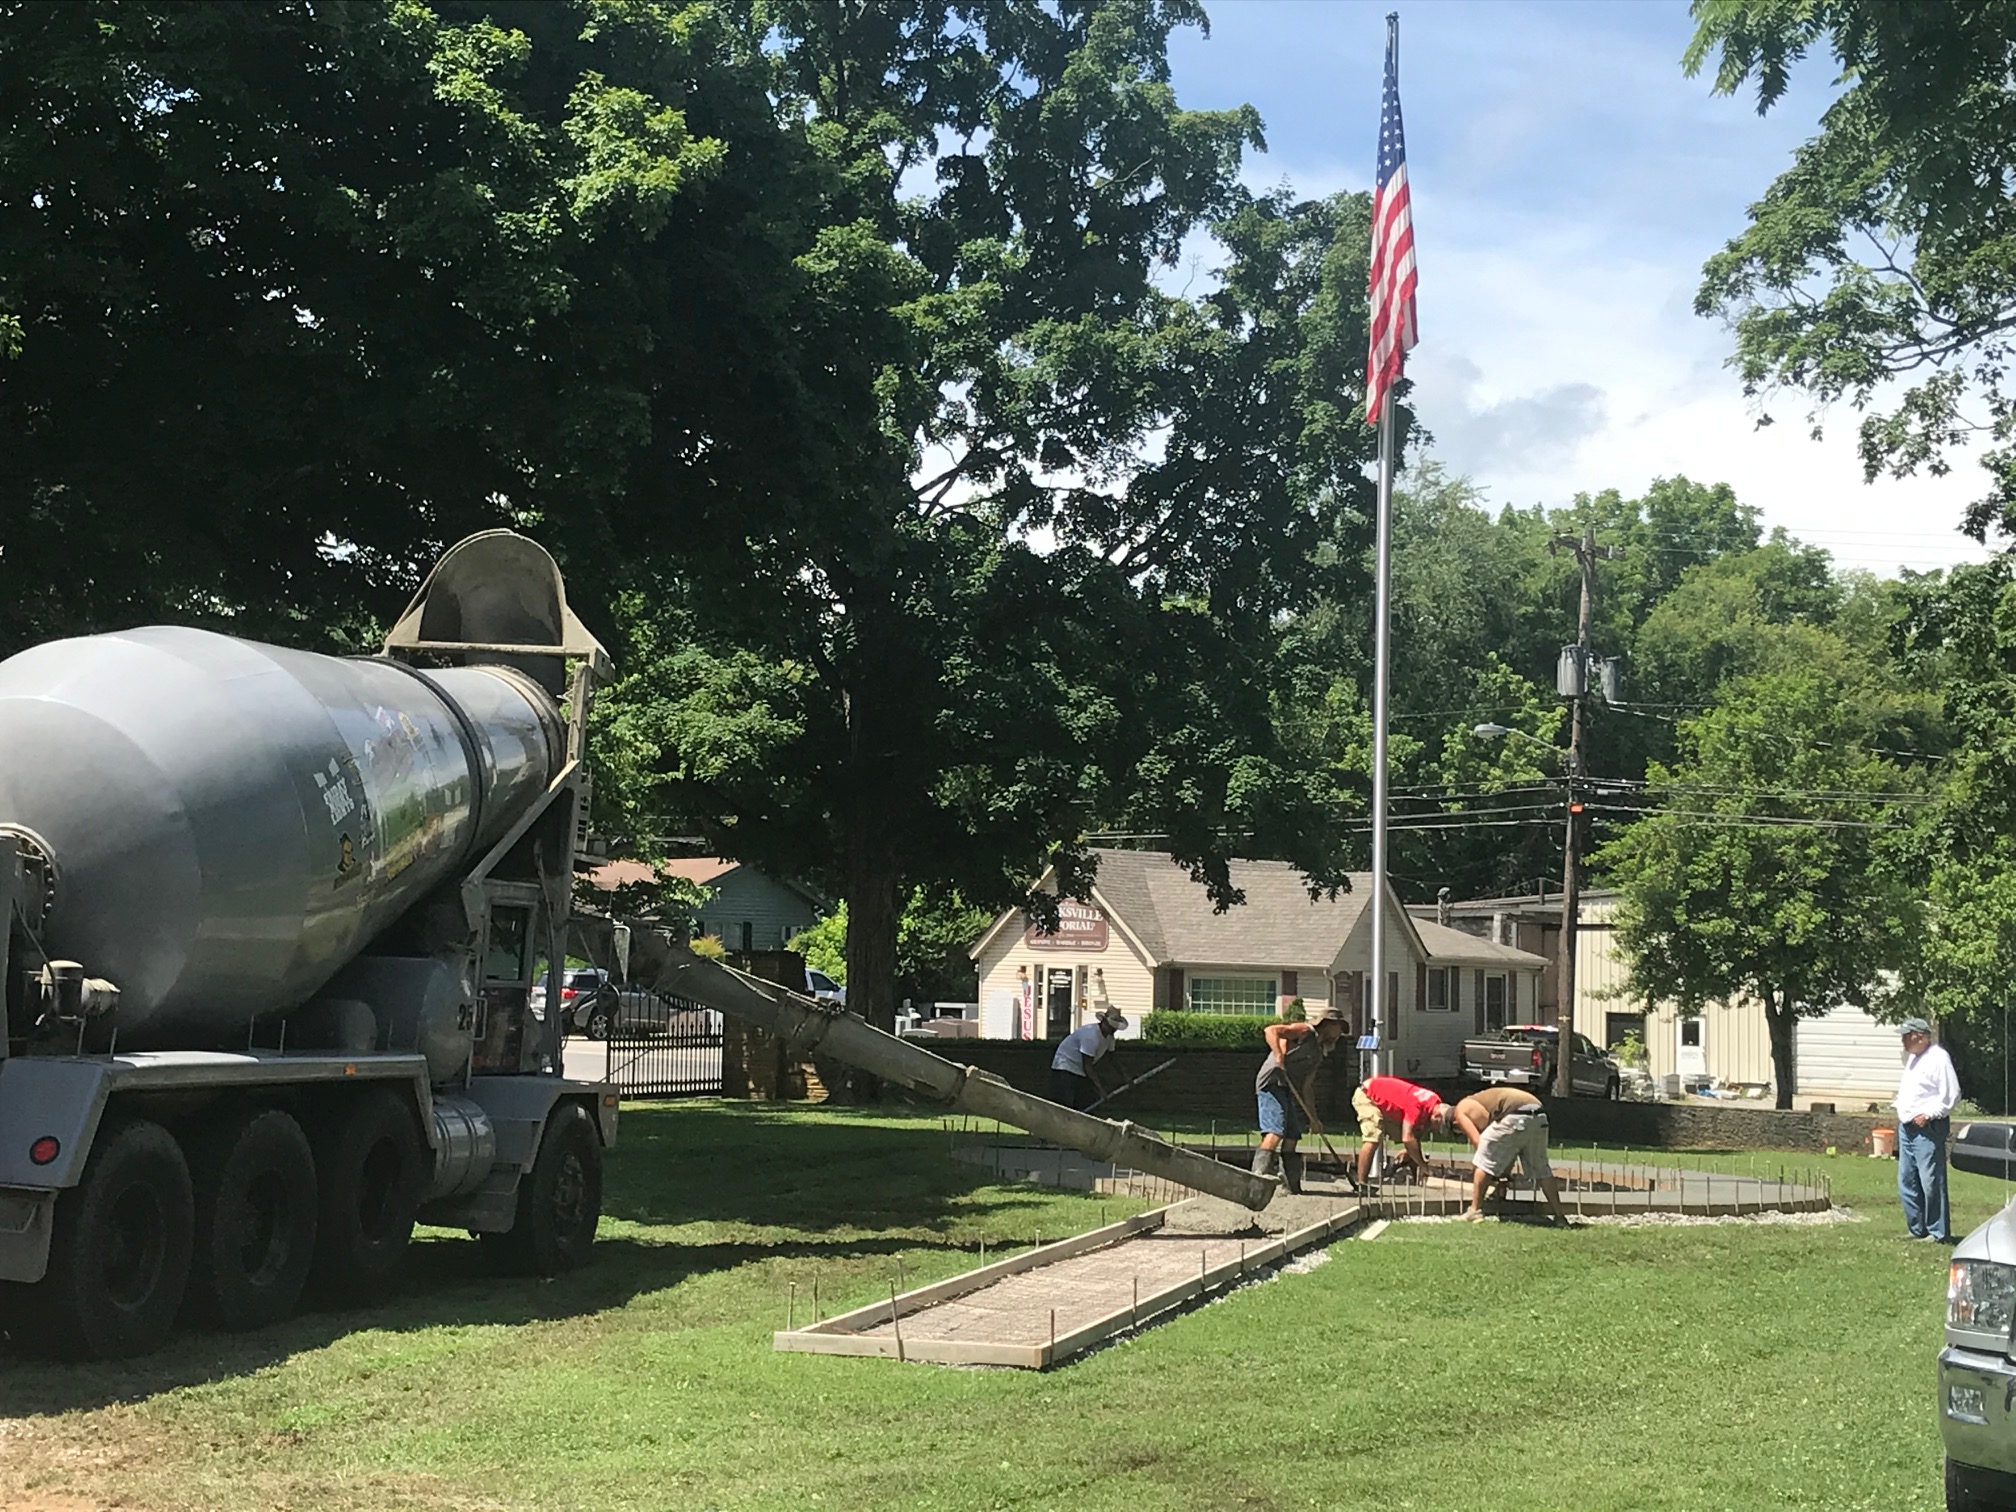 Huge flagpole installed in honor of decorated veterans thanks to one generous trucking company